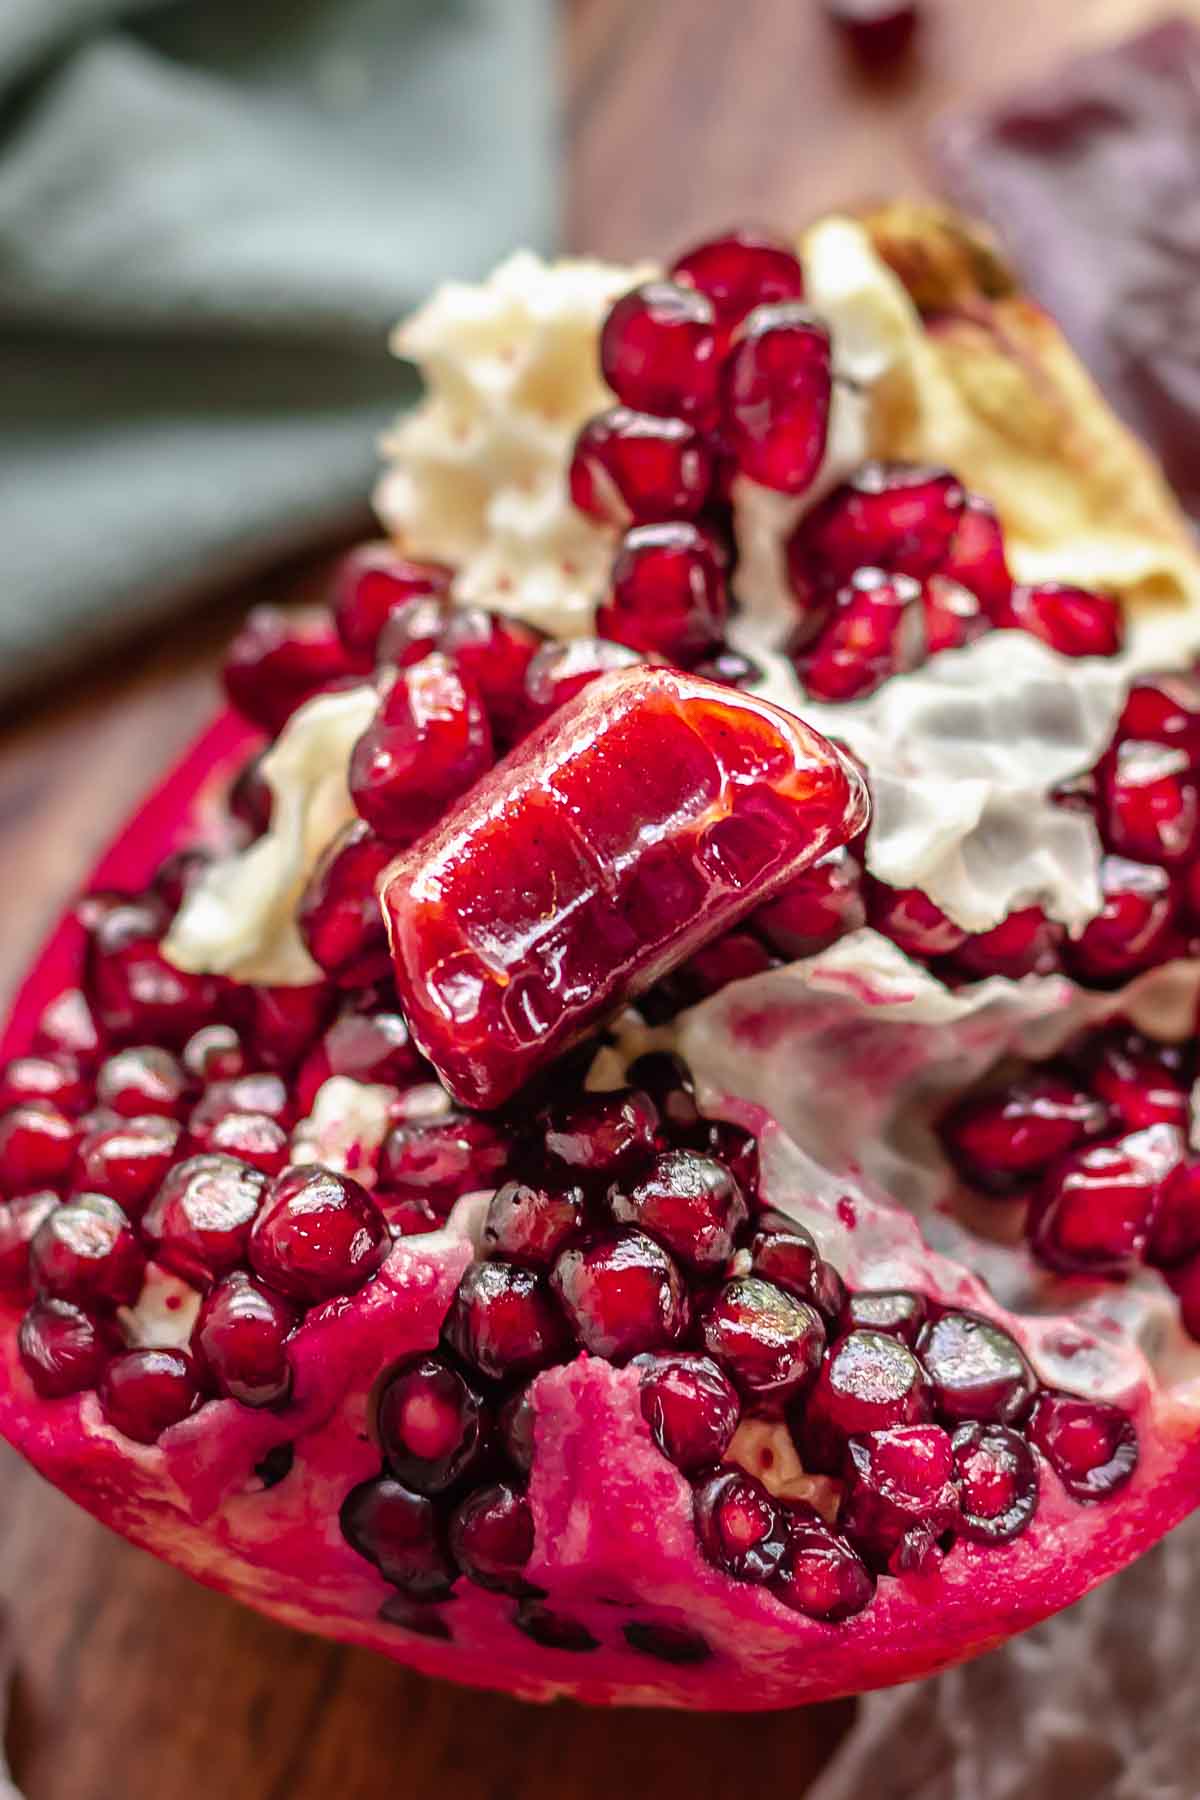 One piece of caramel with a bite removed sitting in pomegranate seeds.